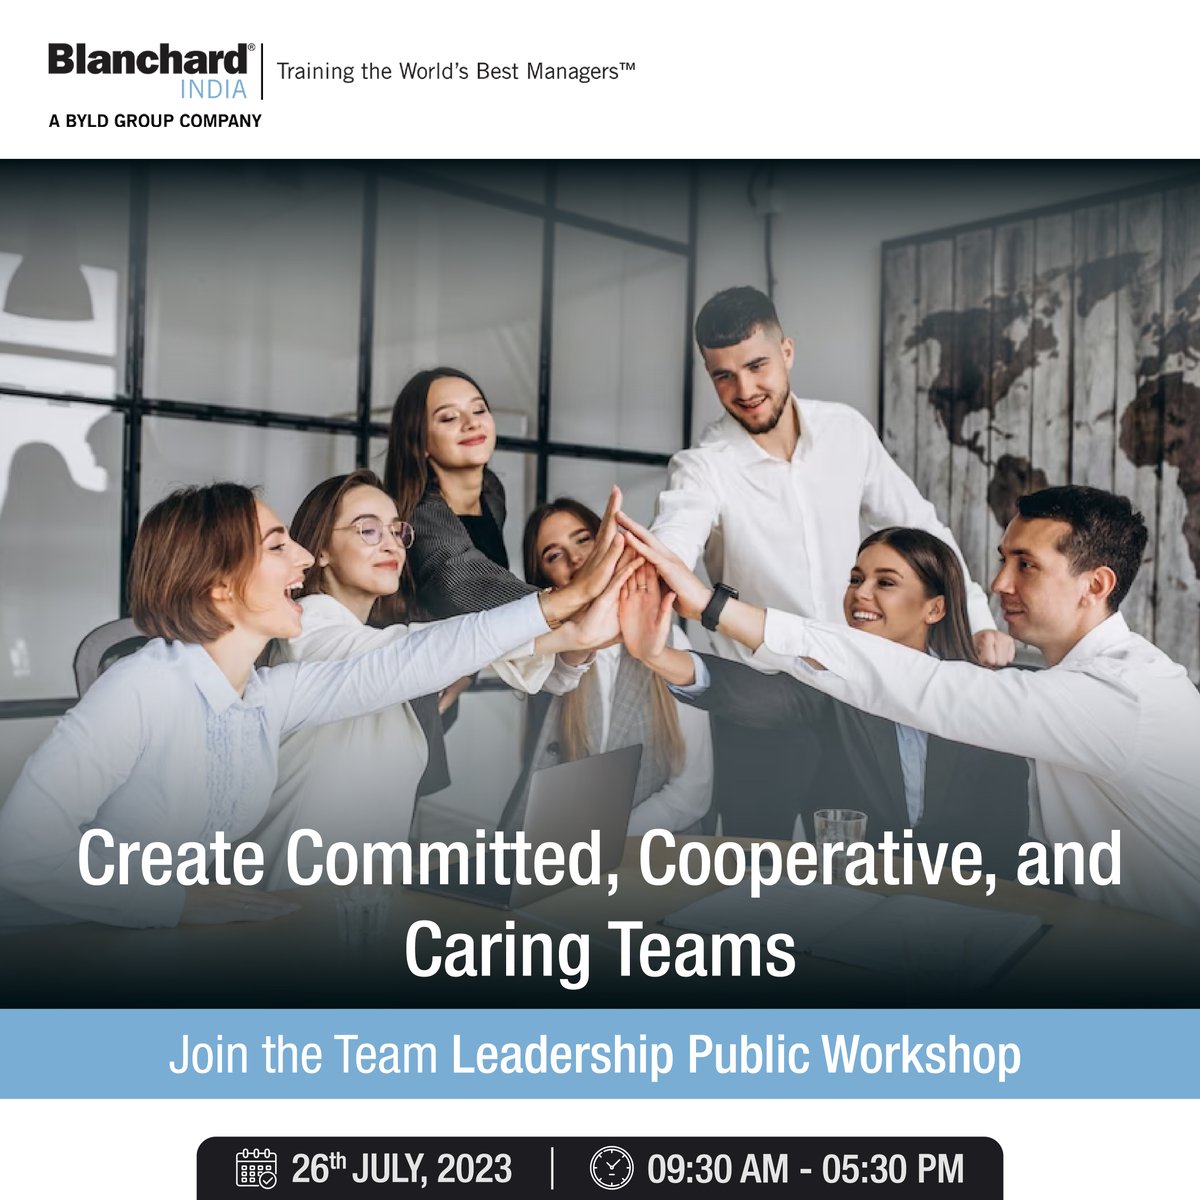 Teamwork is essential to creating competitive advantage, improving innovation, and achieving goals most efficiently and effectively as possible. 

Join the public workshop to know more.
Registration link: bit.ly/3gb4Nwa

 #blanchardindia #teamleadership